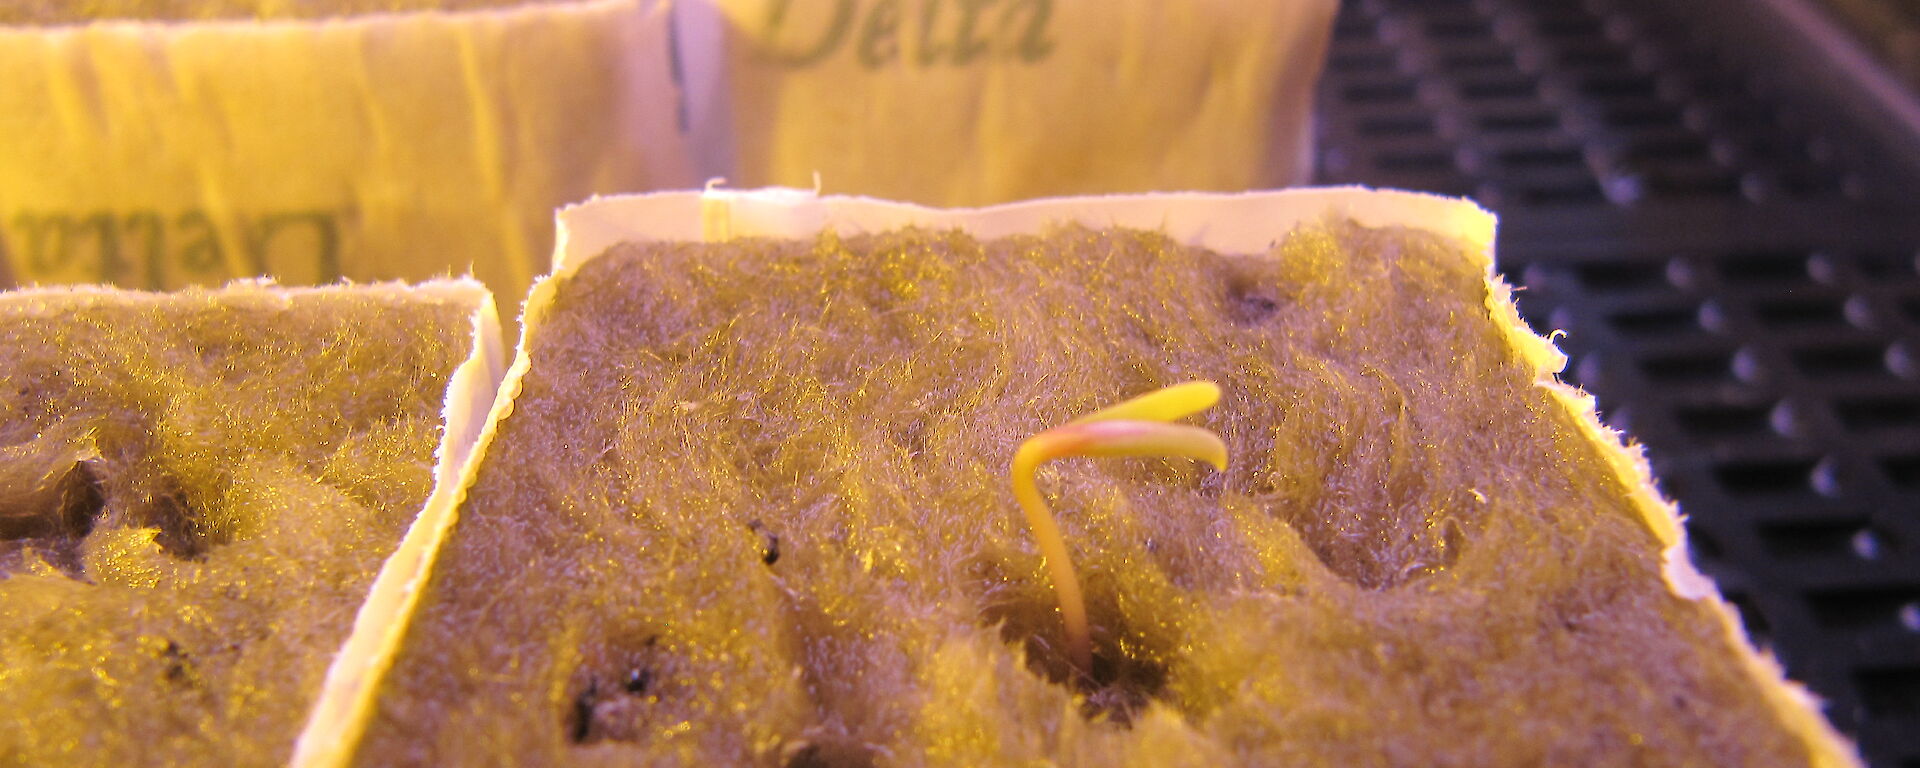 a seedling growing in Casey Hydroponics